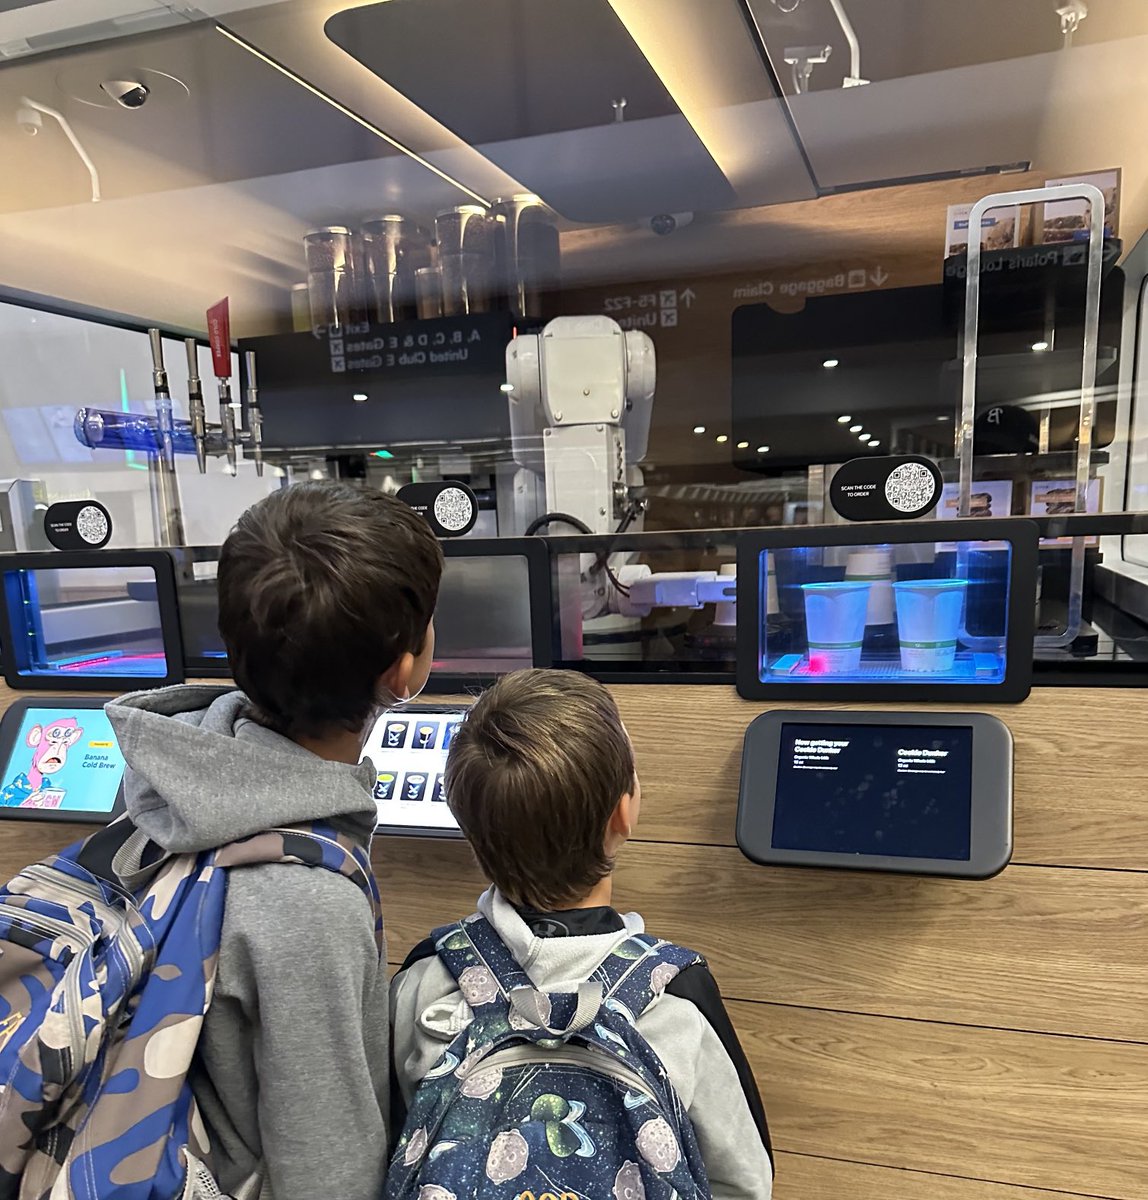 Even the kids are excited about #automation ….but they got pretty weirded out when there was no response to “thank you Mr. Robot”…maybe for version 2.0. #SFO